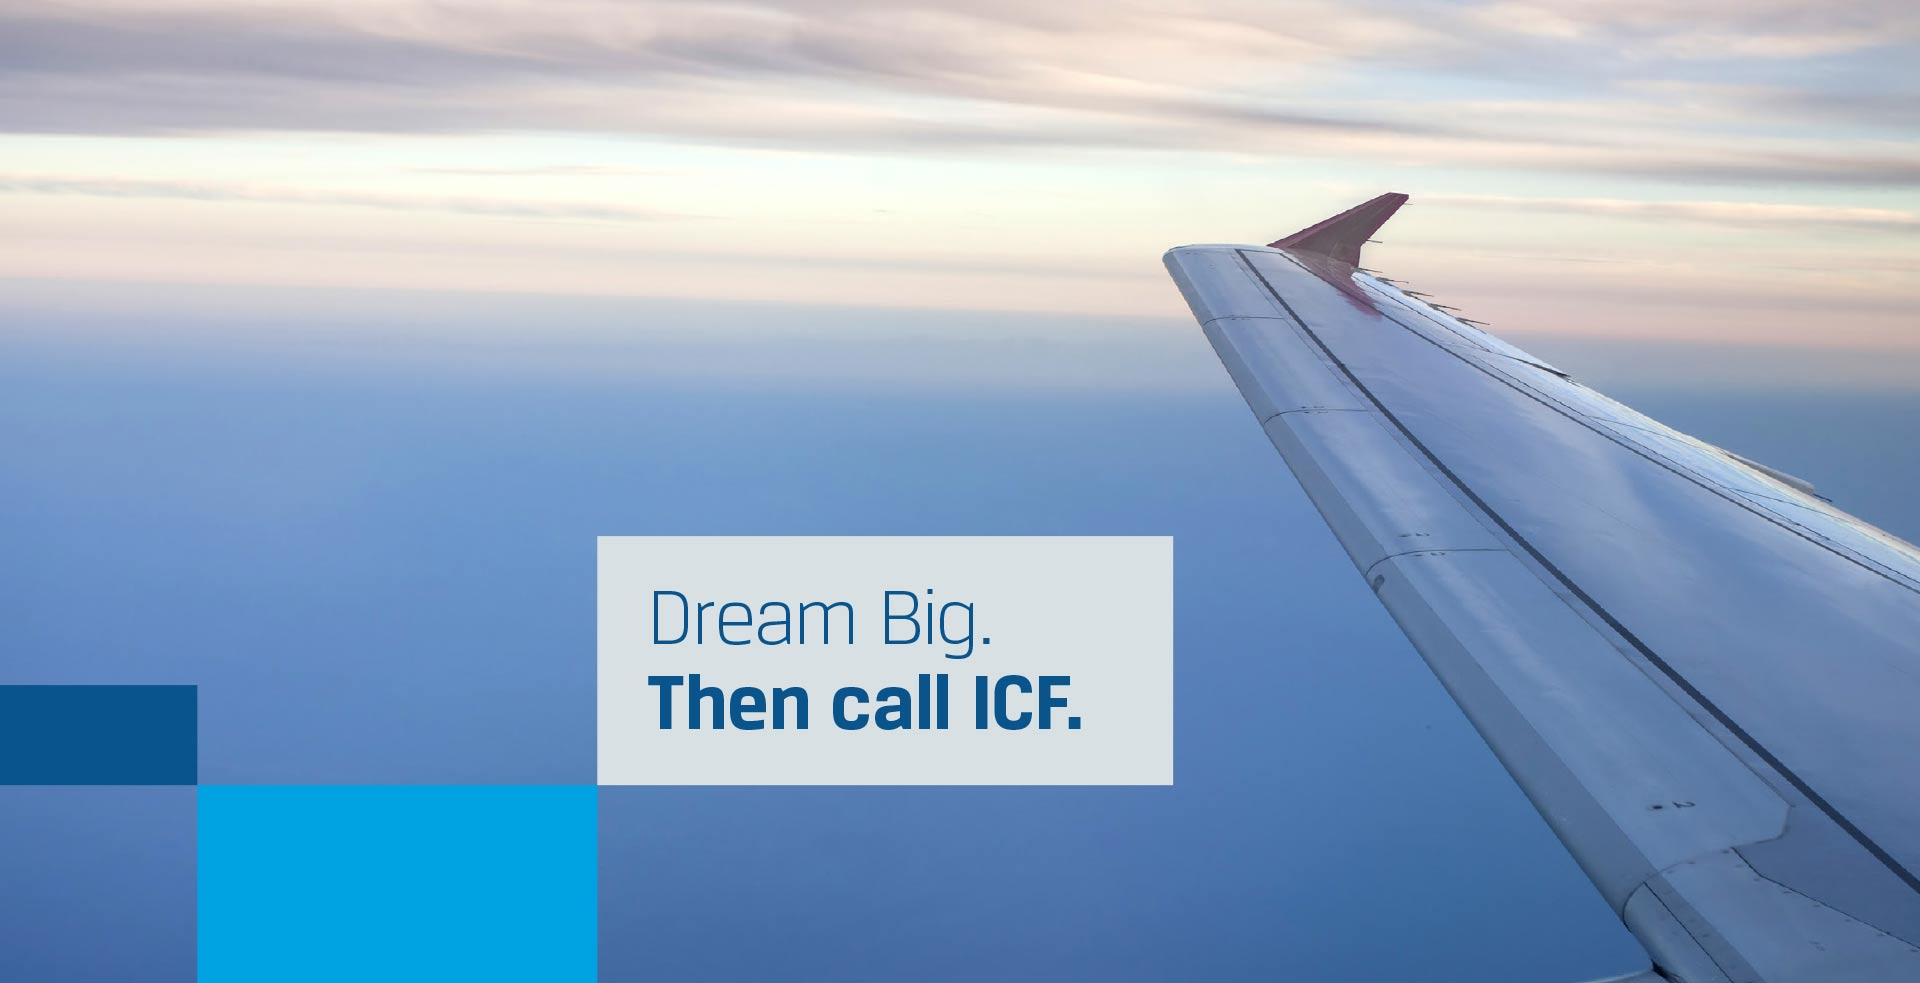 Airplane wing Dream Big. Then call ICF